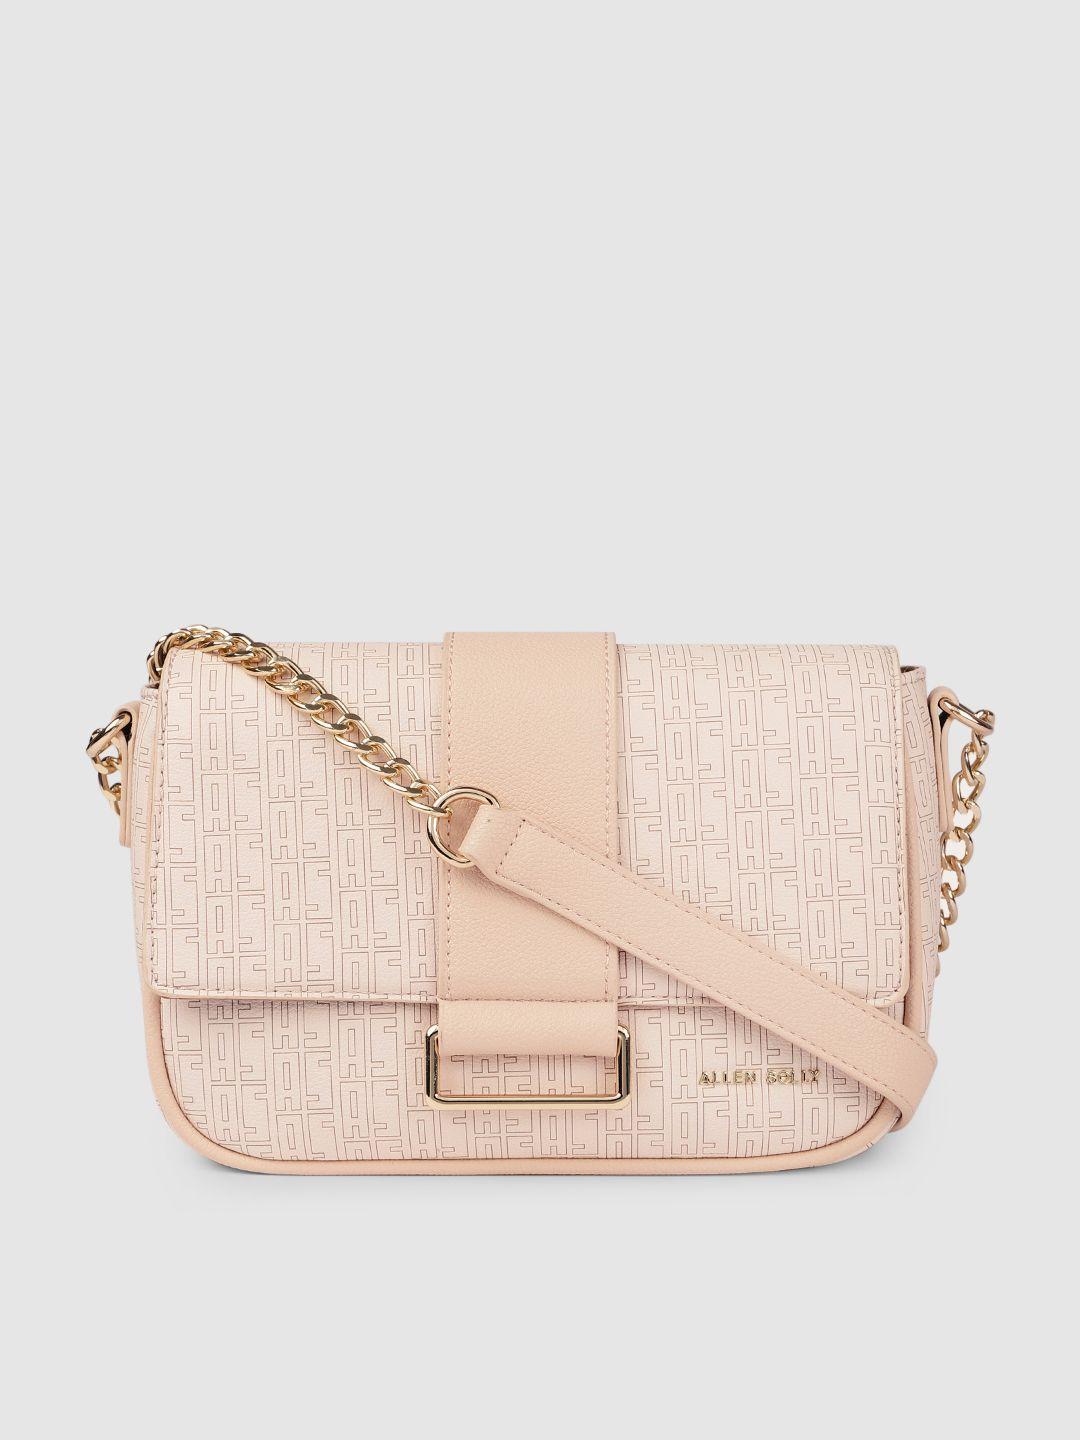 allen solly pink typography printed structured sling bag